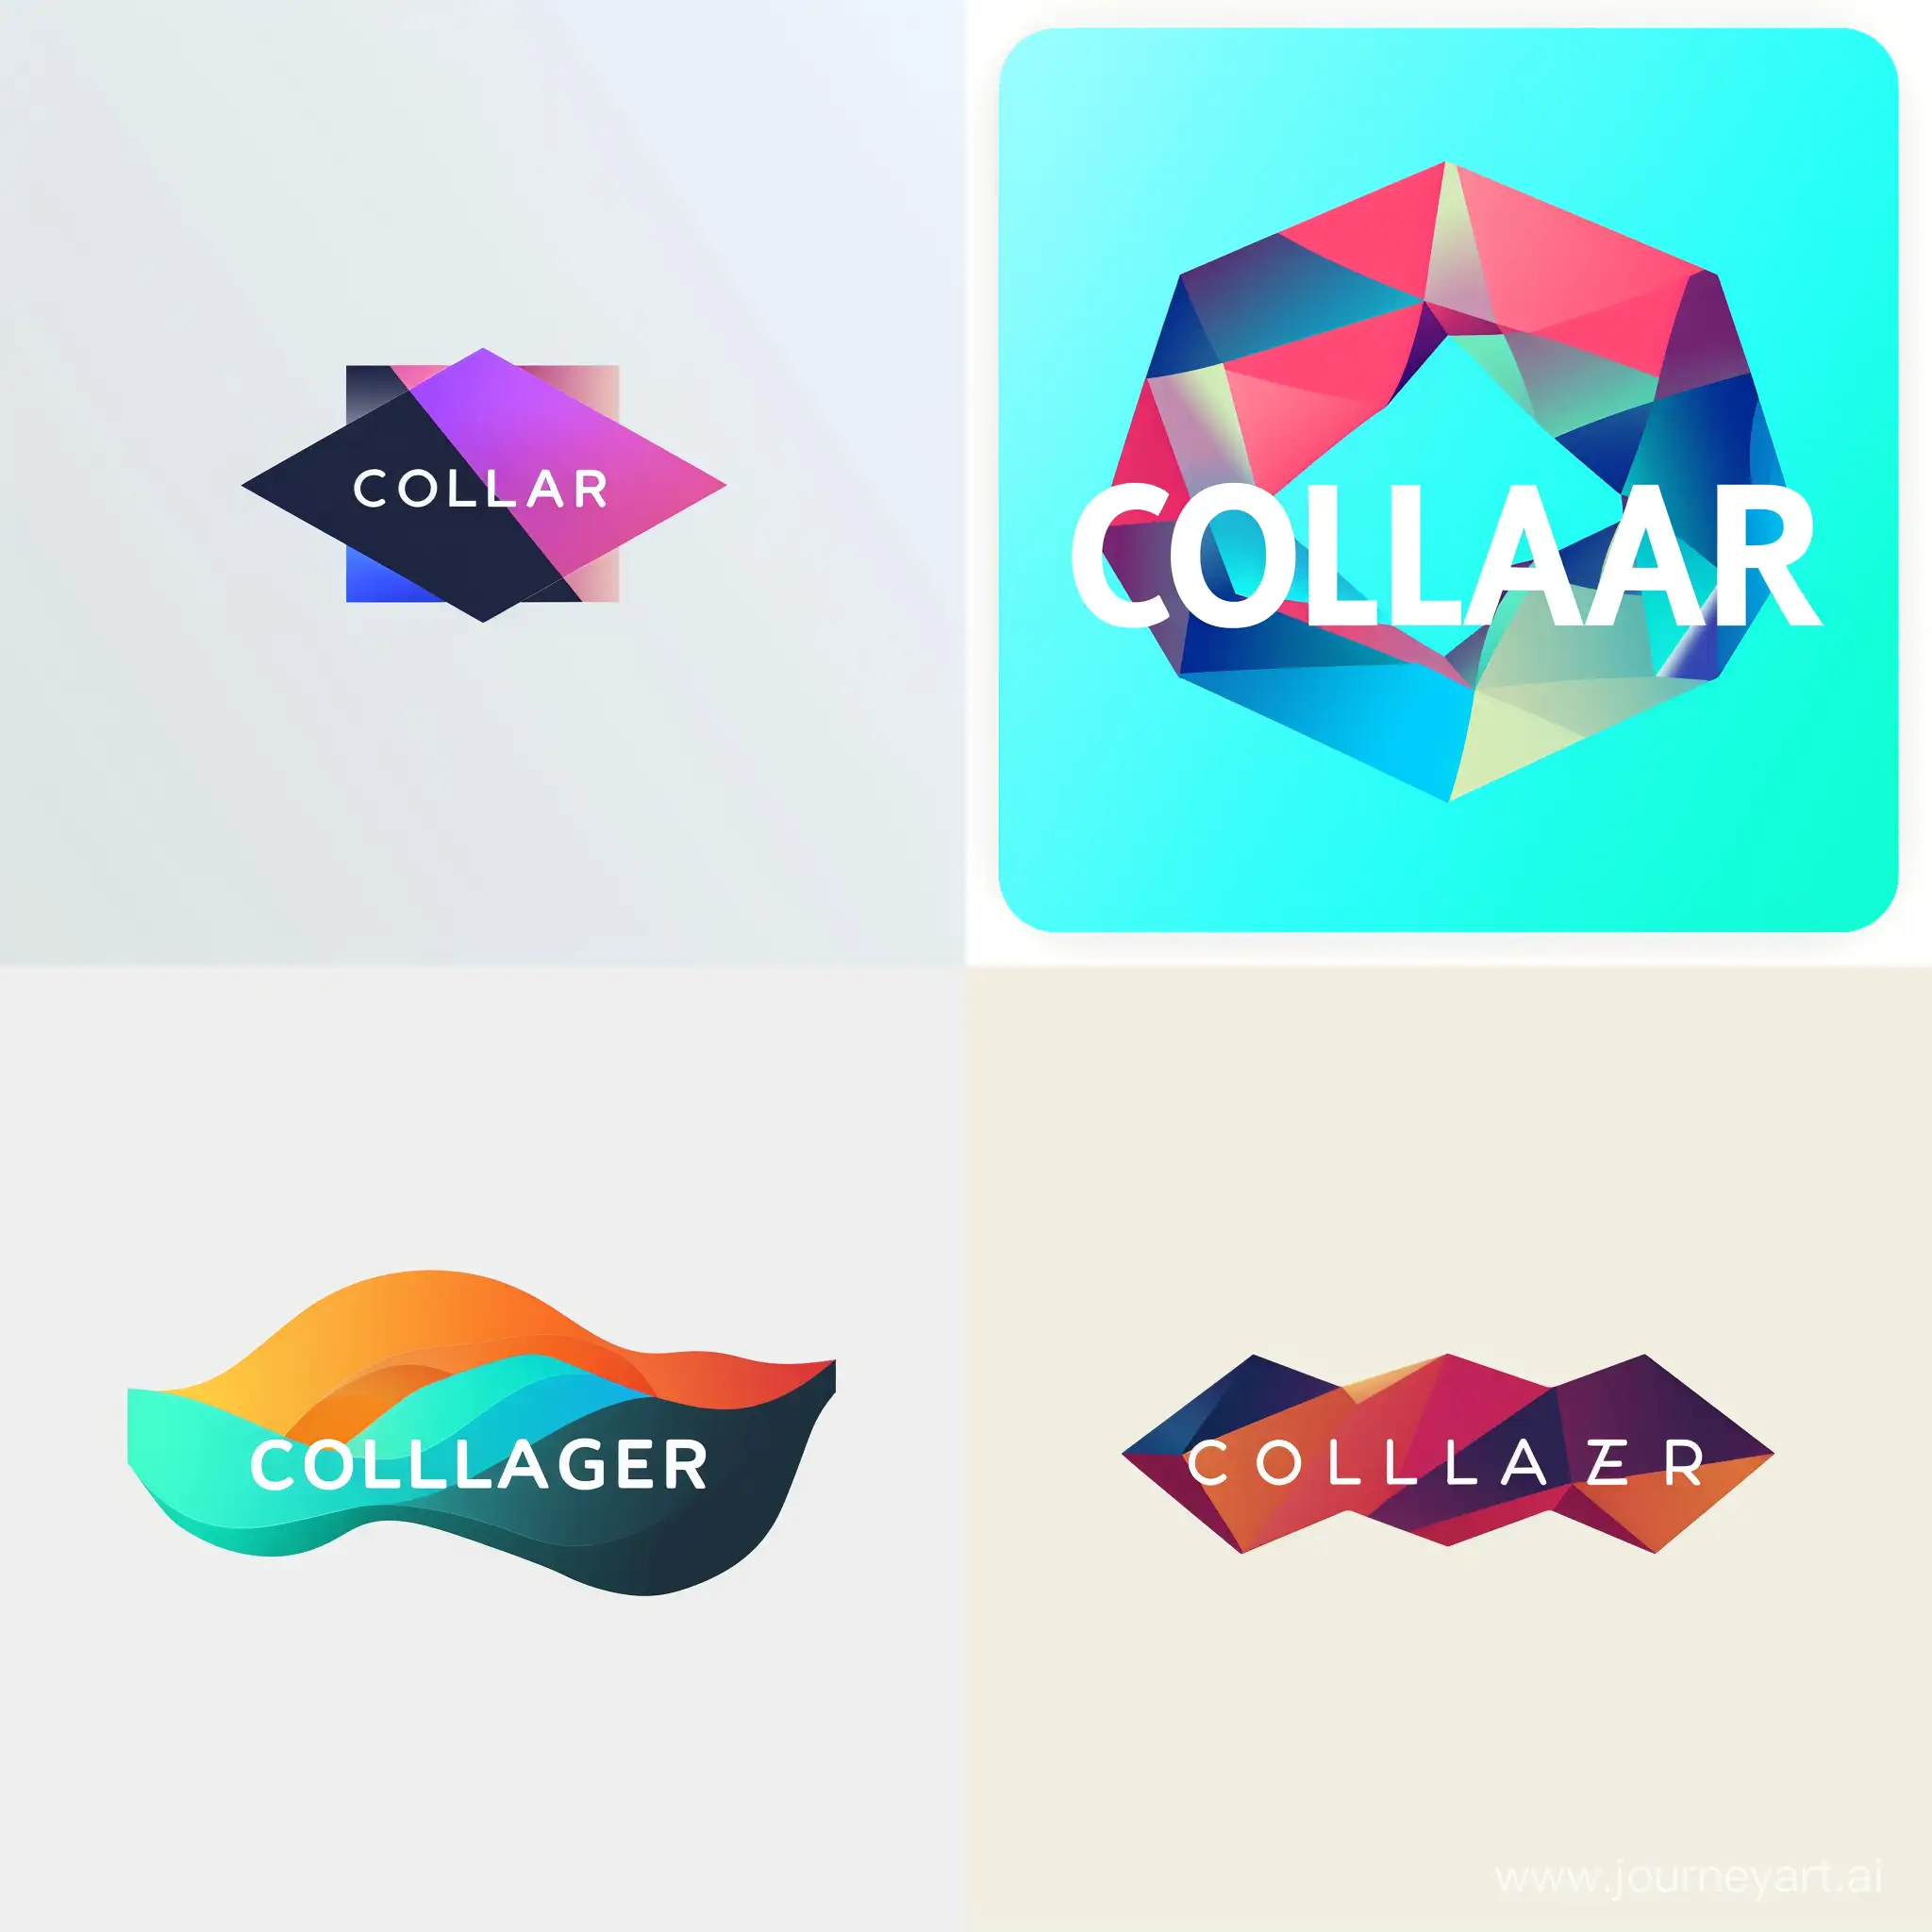 Logo for web app, which creates collages, like mosaic, rollage etc from two images. It should be simple and contain the word COLLAGER capitalized